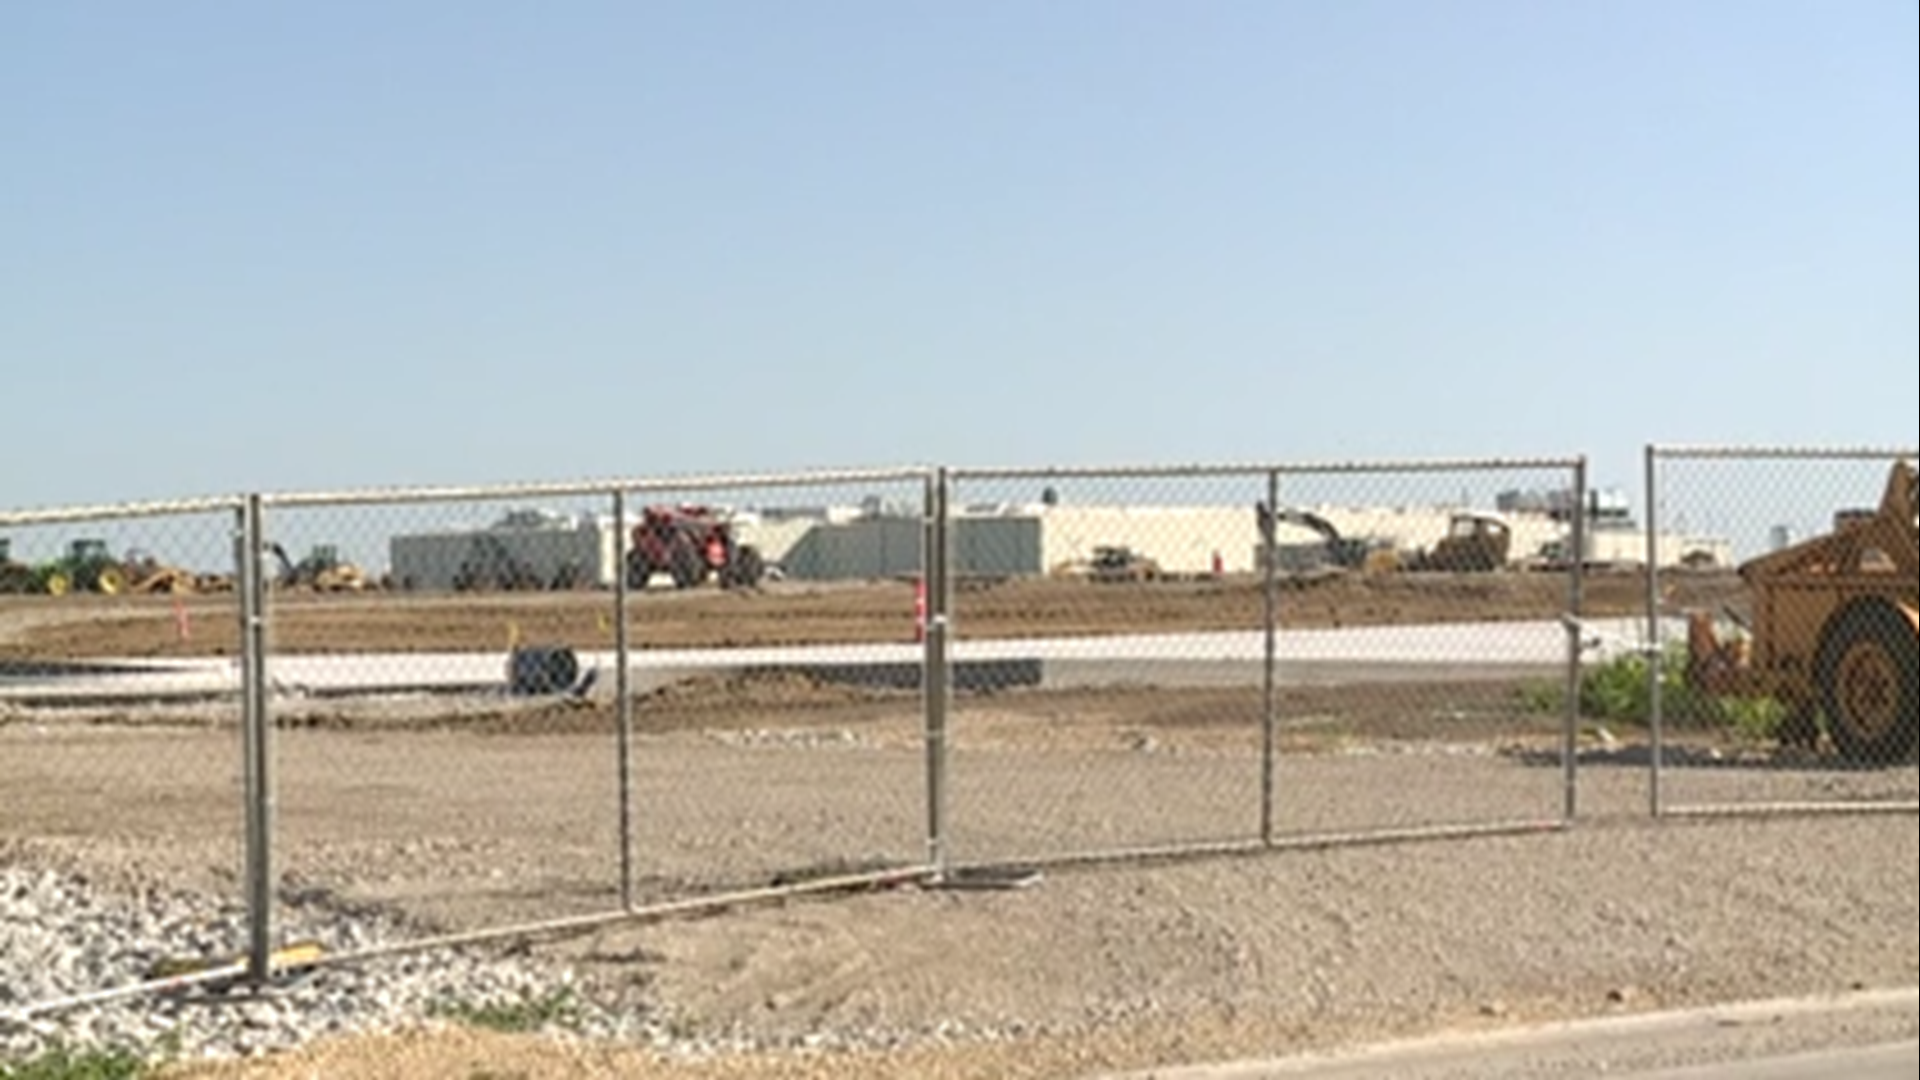 MidAmerican is moving from Marquette Street near River Drive to the Eastern Iowa Industrial Center